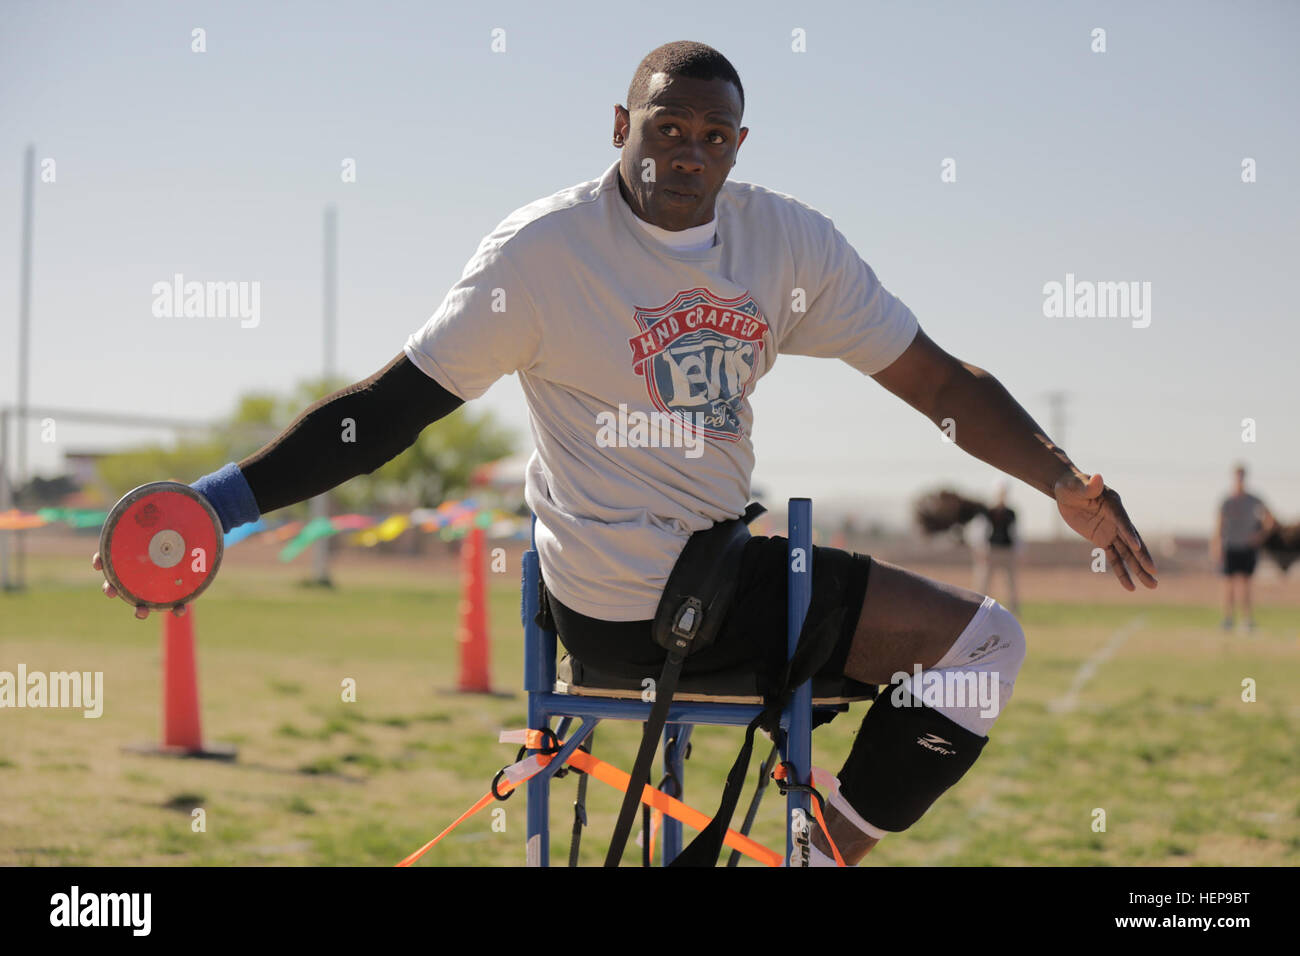 U.S. Army veteran Staff Sgt. Alexander Shaw, Clarksville, Tenn., prepares to throw the discus during the 2015 Army Trials at Fort Bliss, Texas, April 1. Approximately 80 wounded, ill and injured Soldiers and veterans are at Fort Bliss to train and compete in a series of athletic events including archery, cycling, shooting, sitting volleyball, swimming, track, and field, and wheelchair basketball. Army Trials, March 29 - April 2, are conducted by the Army Warrior Transition Command and hosted by Fort Bliss. Army Trials help determine who will get a spot on the Department of Defense Warrior Game Stock Photo